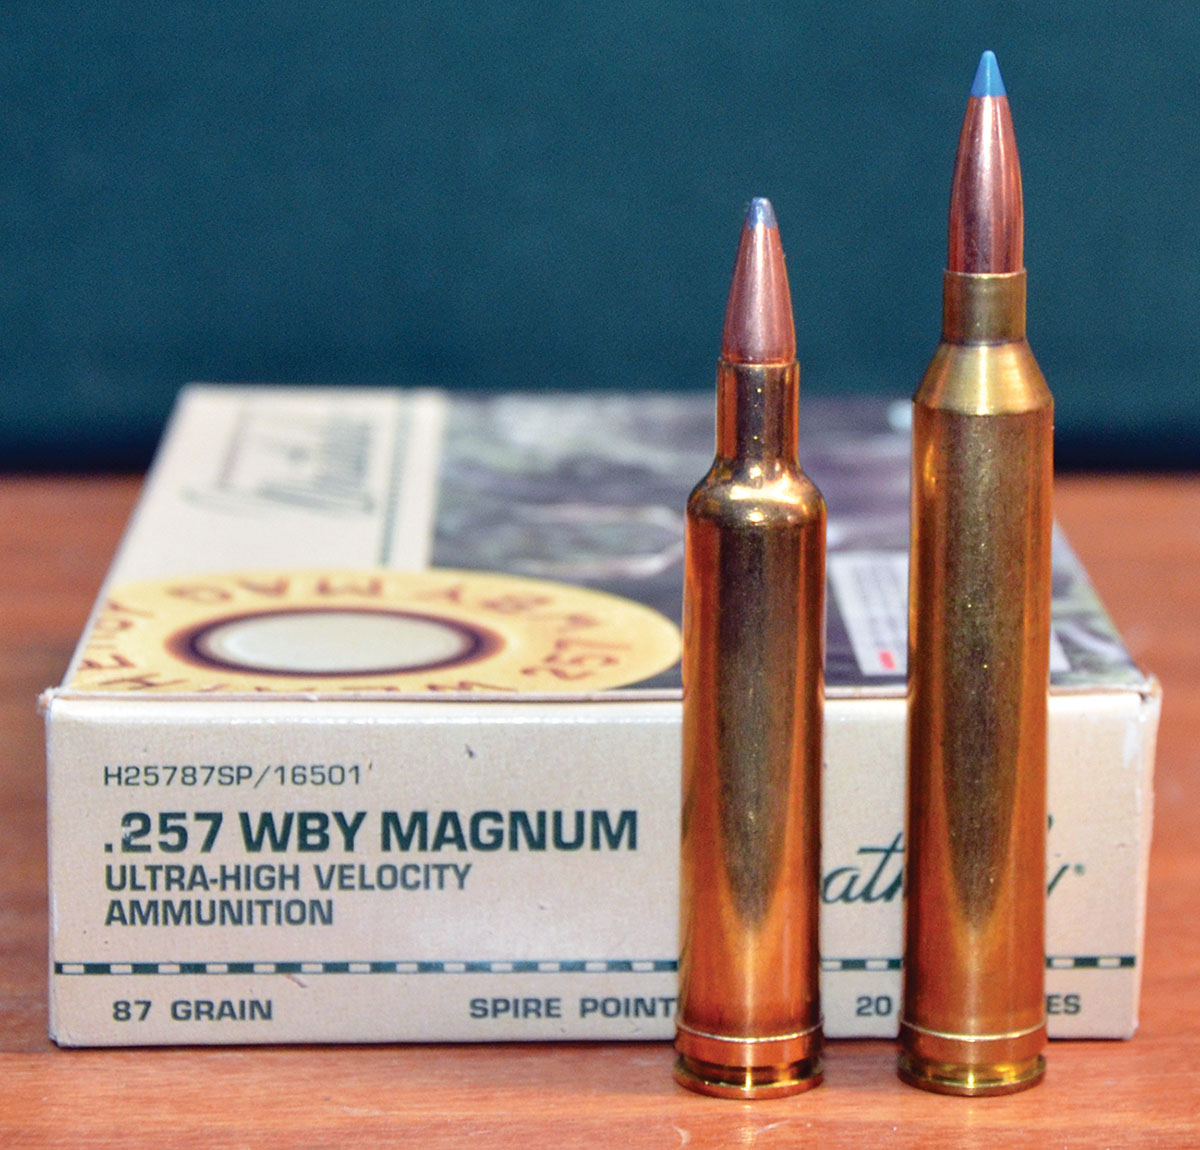 When beginning the development of a 257 Magnum cartridge during the early 1940s, Roy Weatherby first necked down the full-length 300 H&H Magnum case. When it proved to be too capacious for the use of IMR-4350, which was the slowest-burning powder on the market at the time, Weatherby shortened it to just a bit longer than the 30-06 Springfield case.